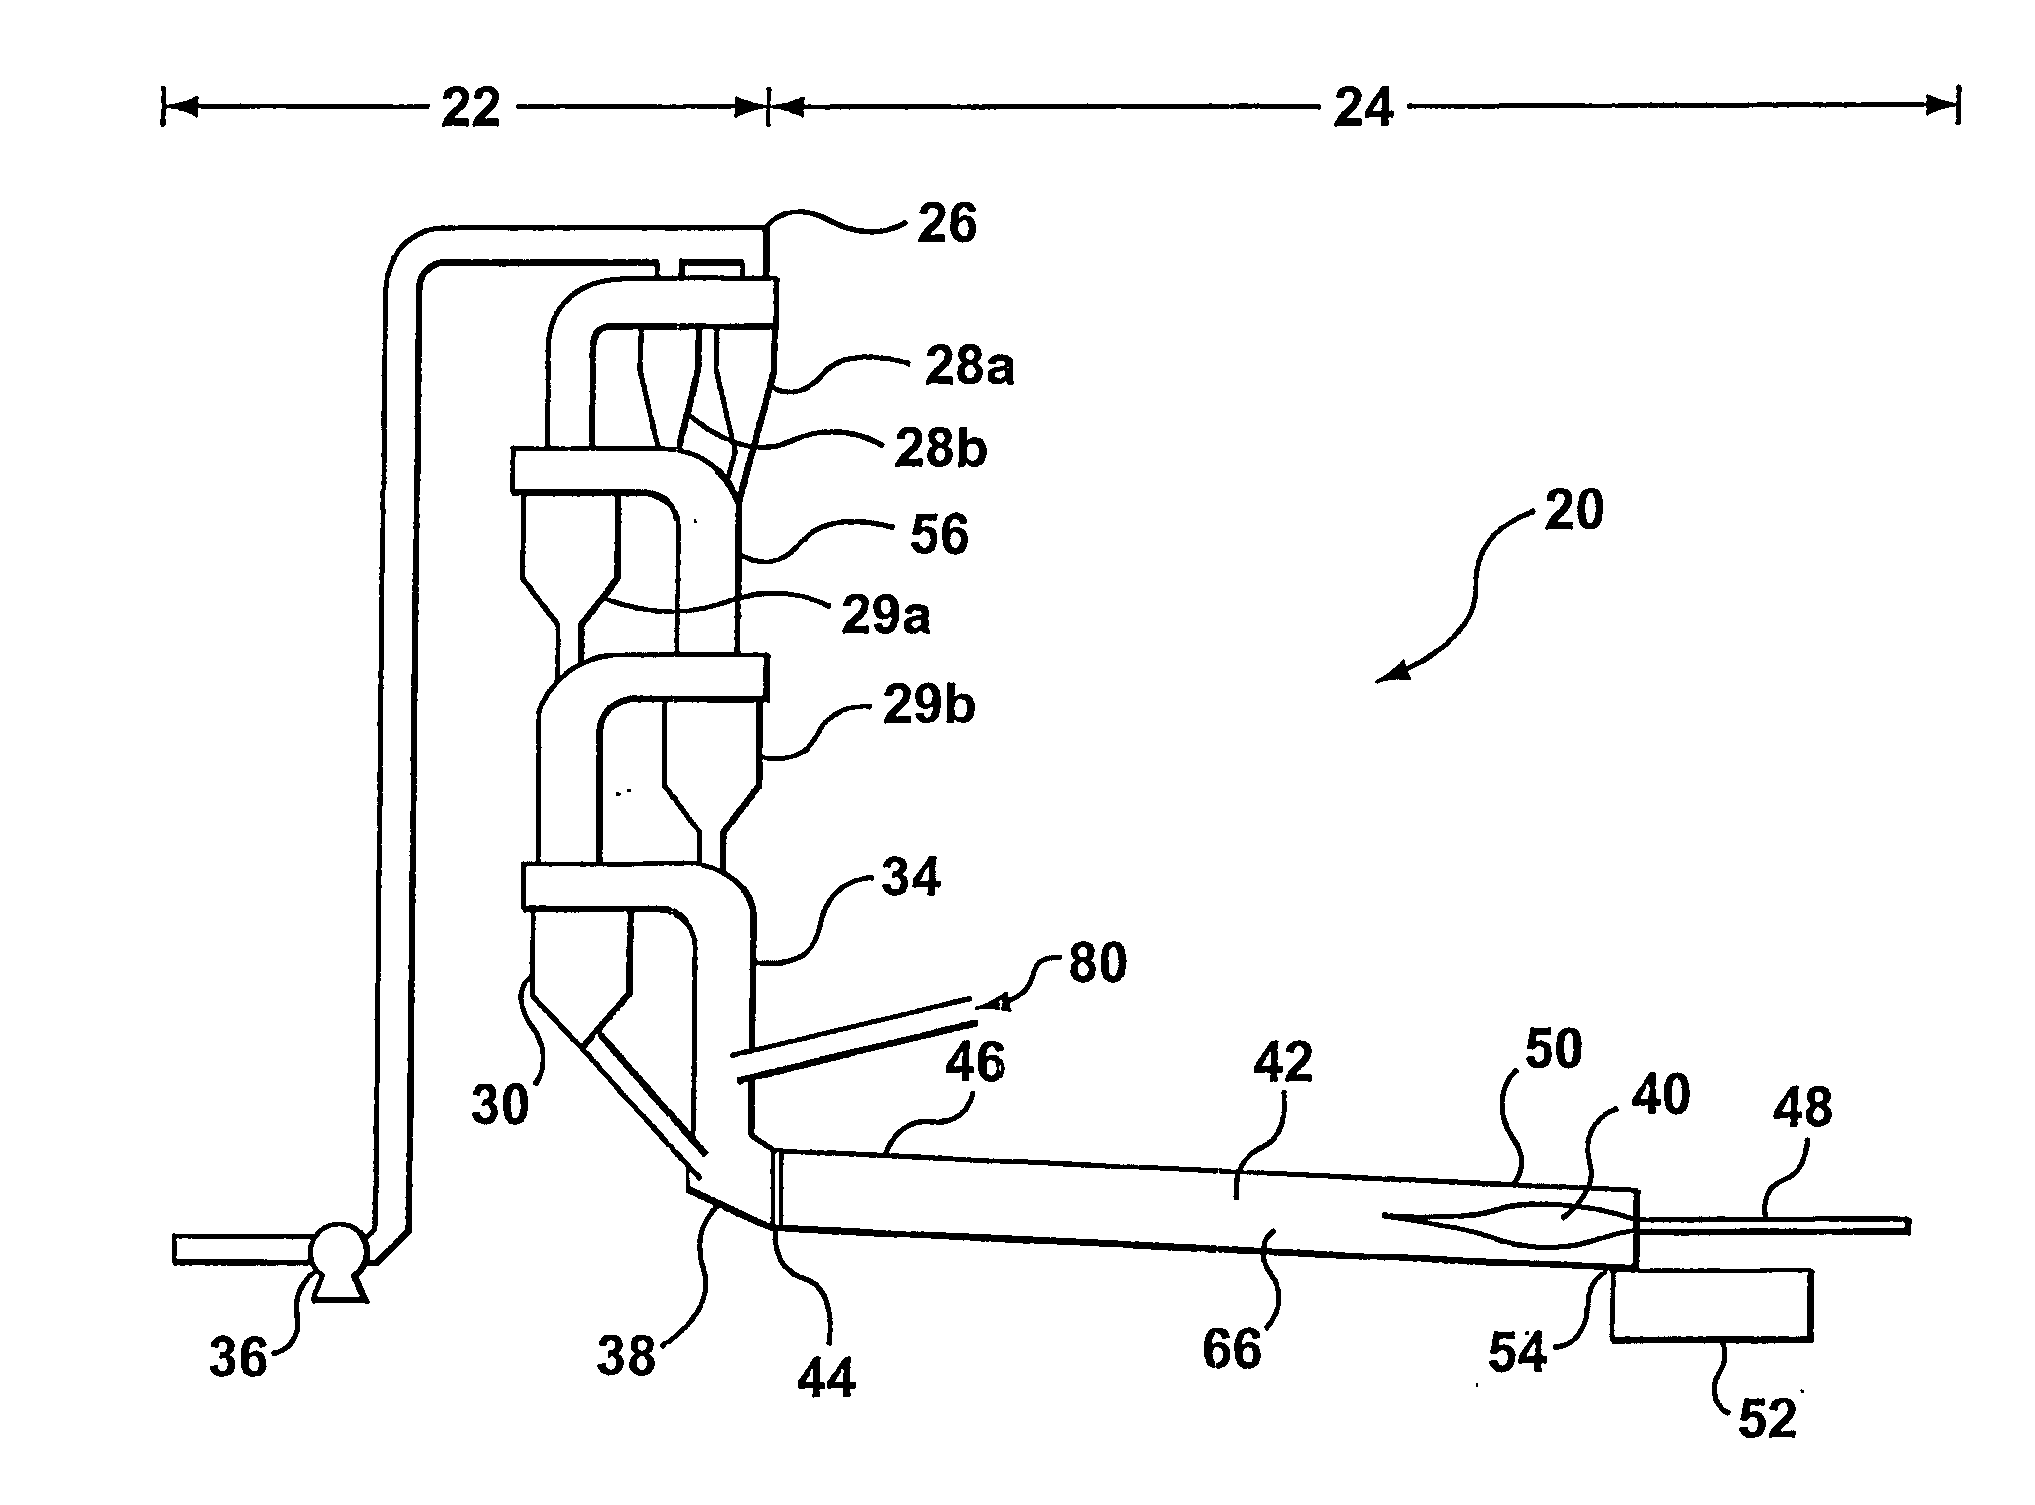 Method and system for process gas entrainment and mixing in a kiln system